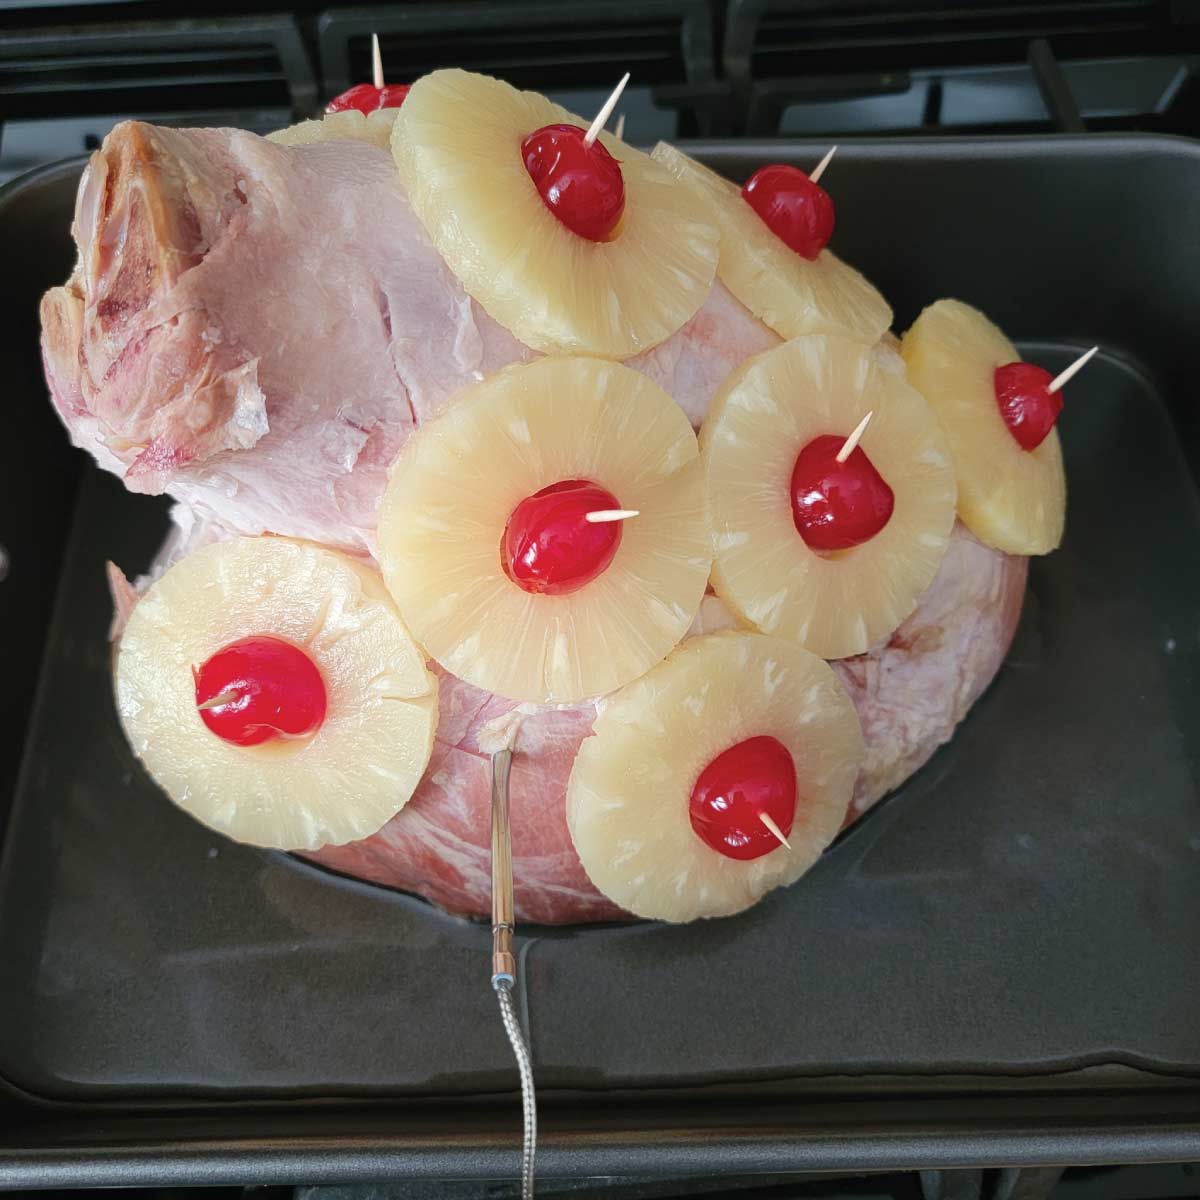 Ham in a roasting pan with pineapple slices and cherries on it with a thermometer probe in it.